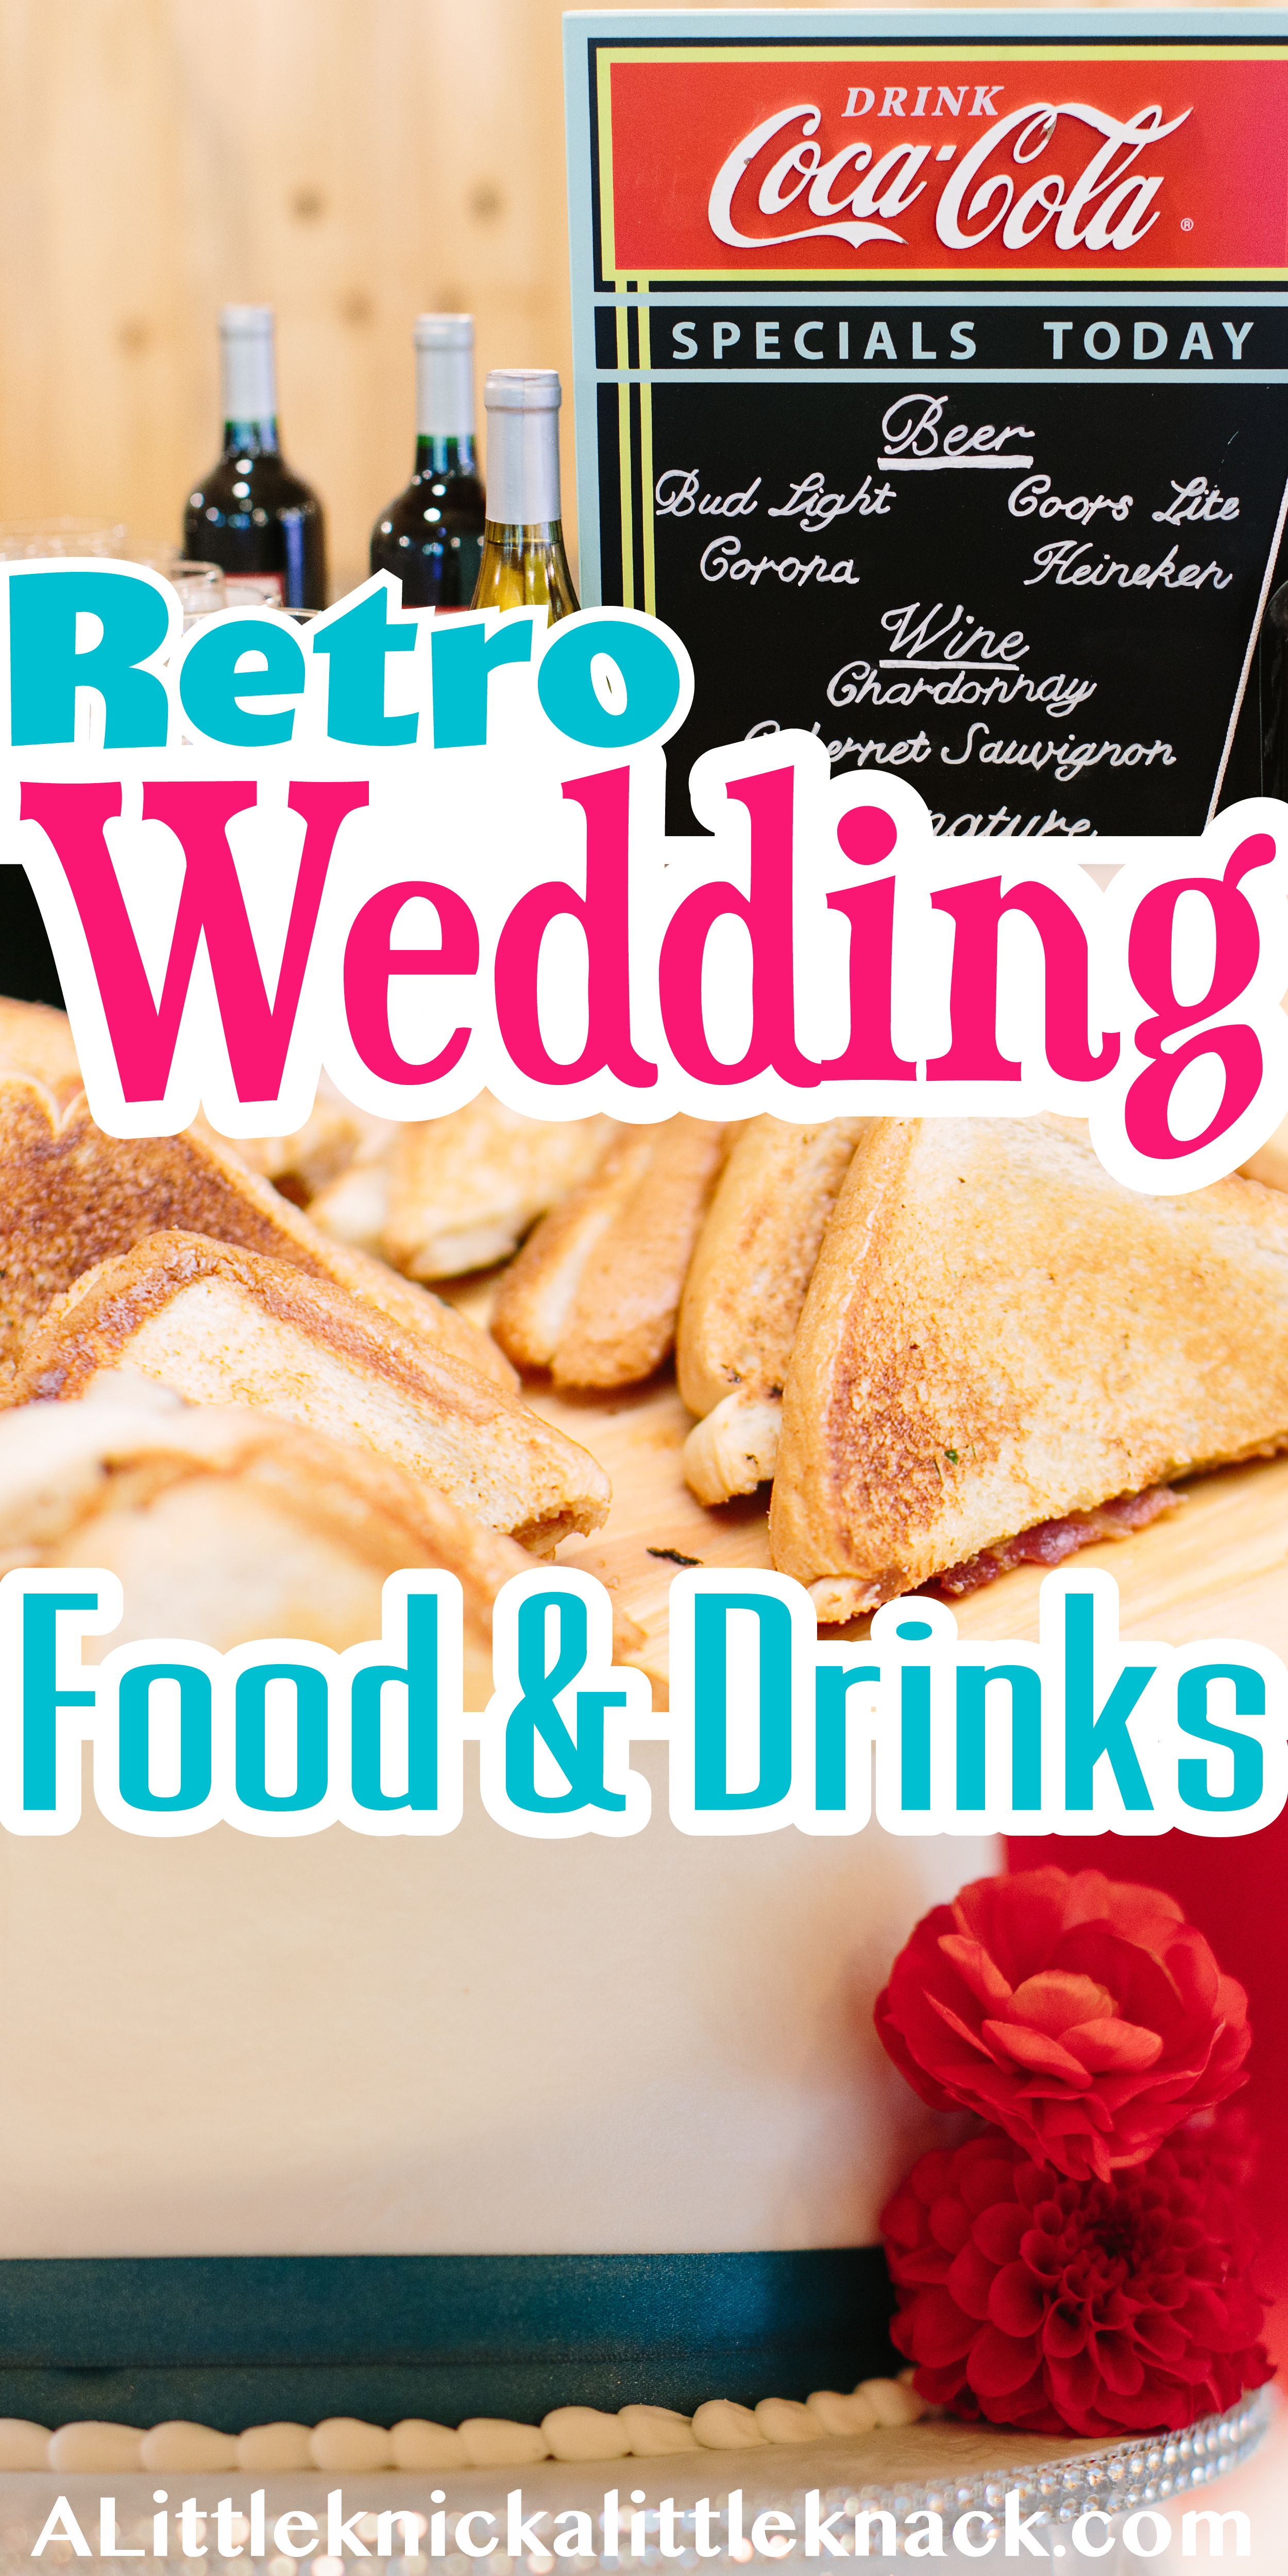 A collage of retro wedding food pictures with a text overlay